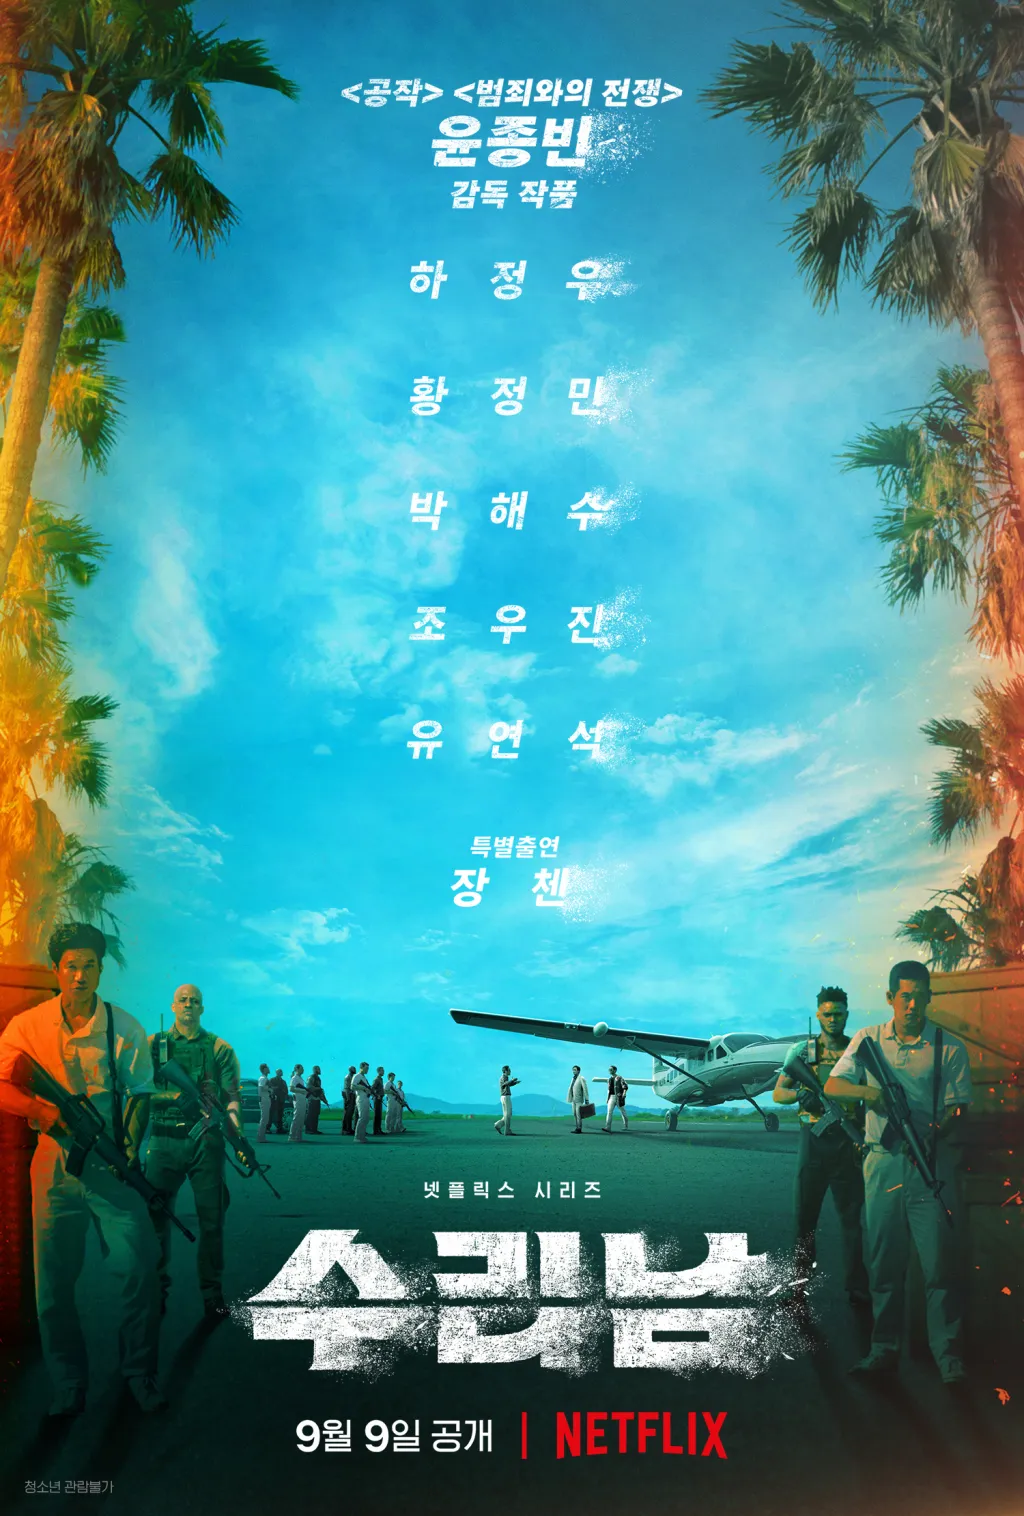 Jung-woo Ha's new drama 'Surinam' releases poster, set to hit Netflix on September 9 | FMV6